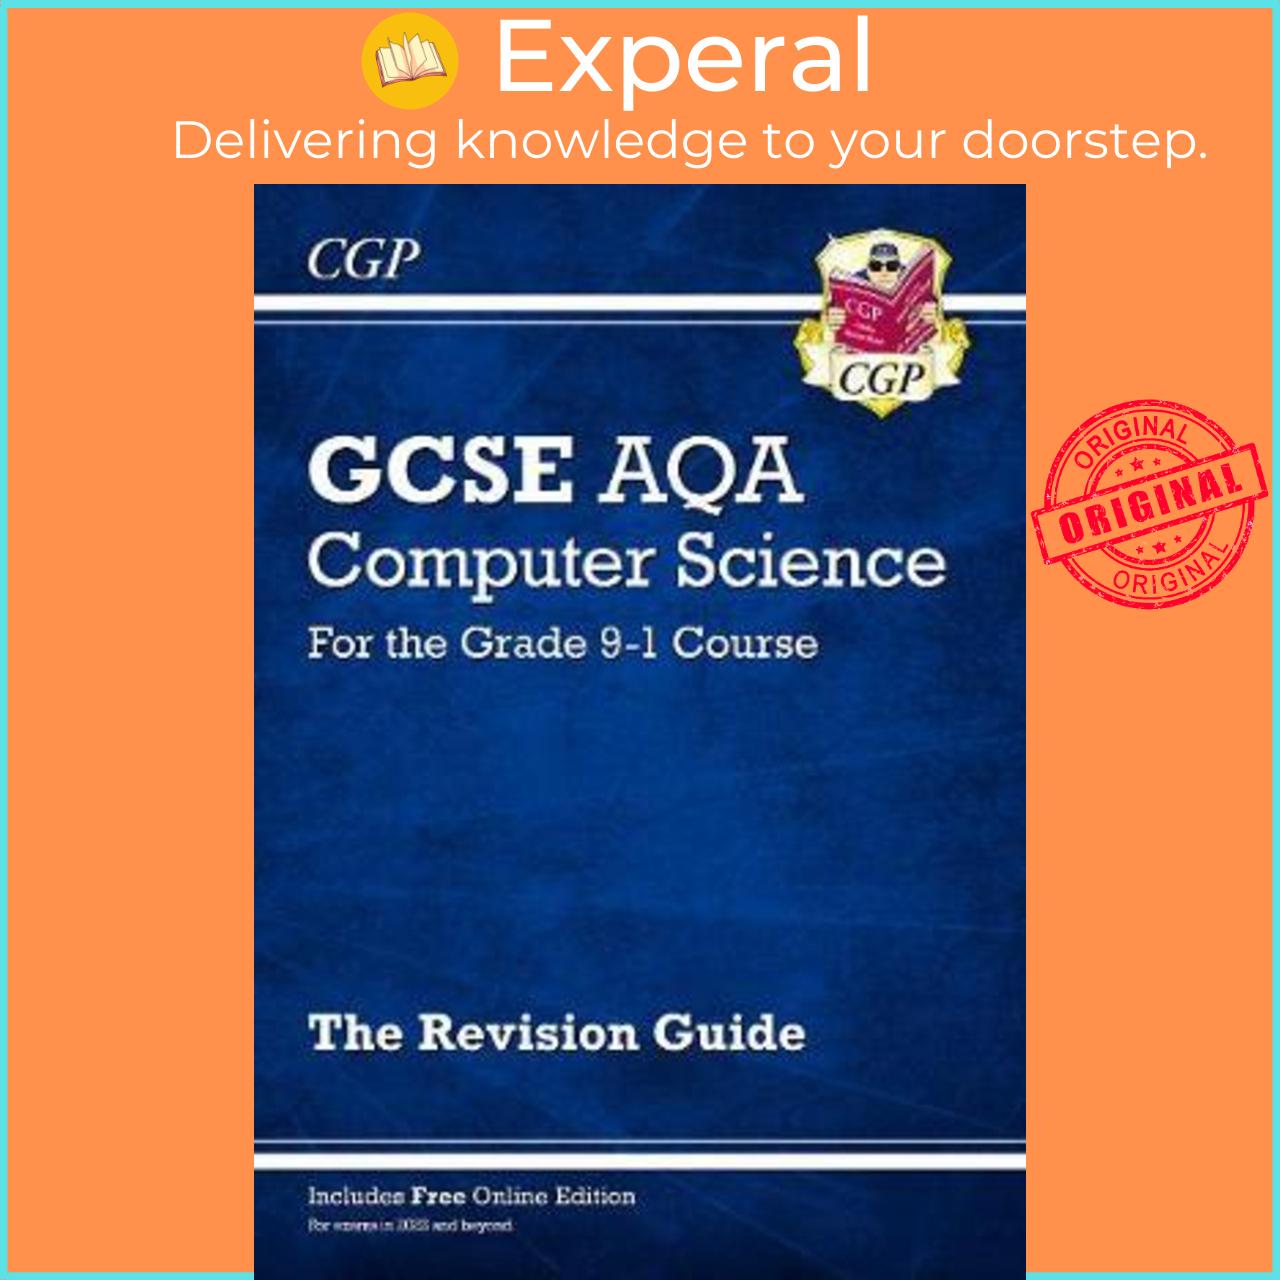 Sách - New GCSE Computer Science AQA Revision Guide - for exams in 2022 and beyond by CGP Books (UK edition, paperback)